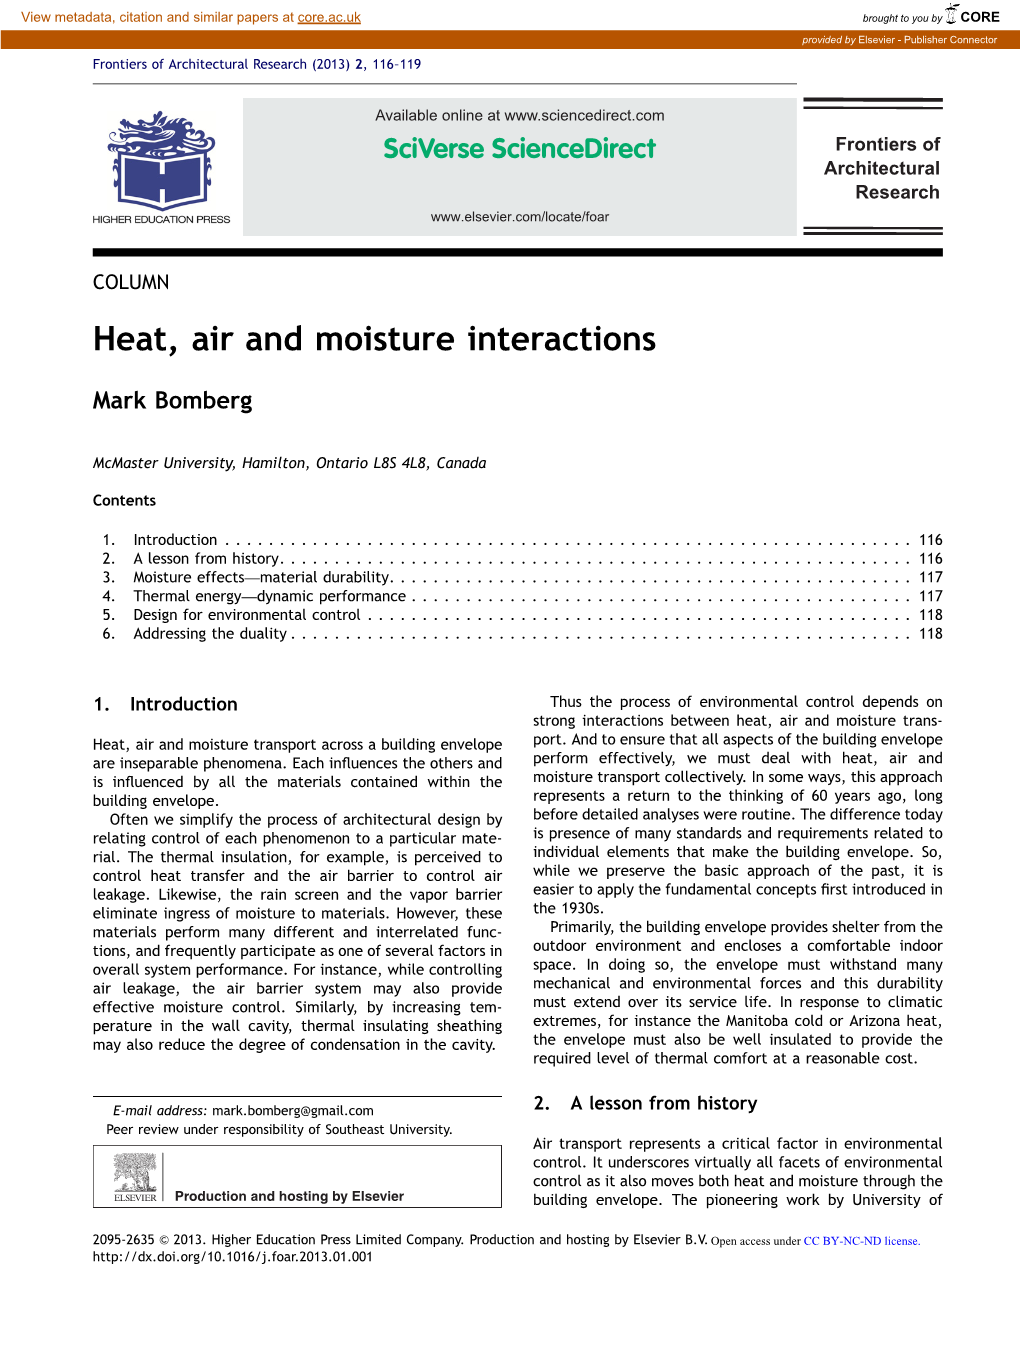 Heat, Air and Moisture Interactions